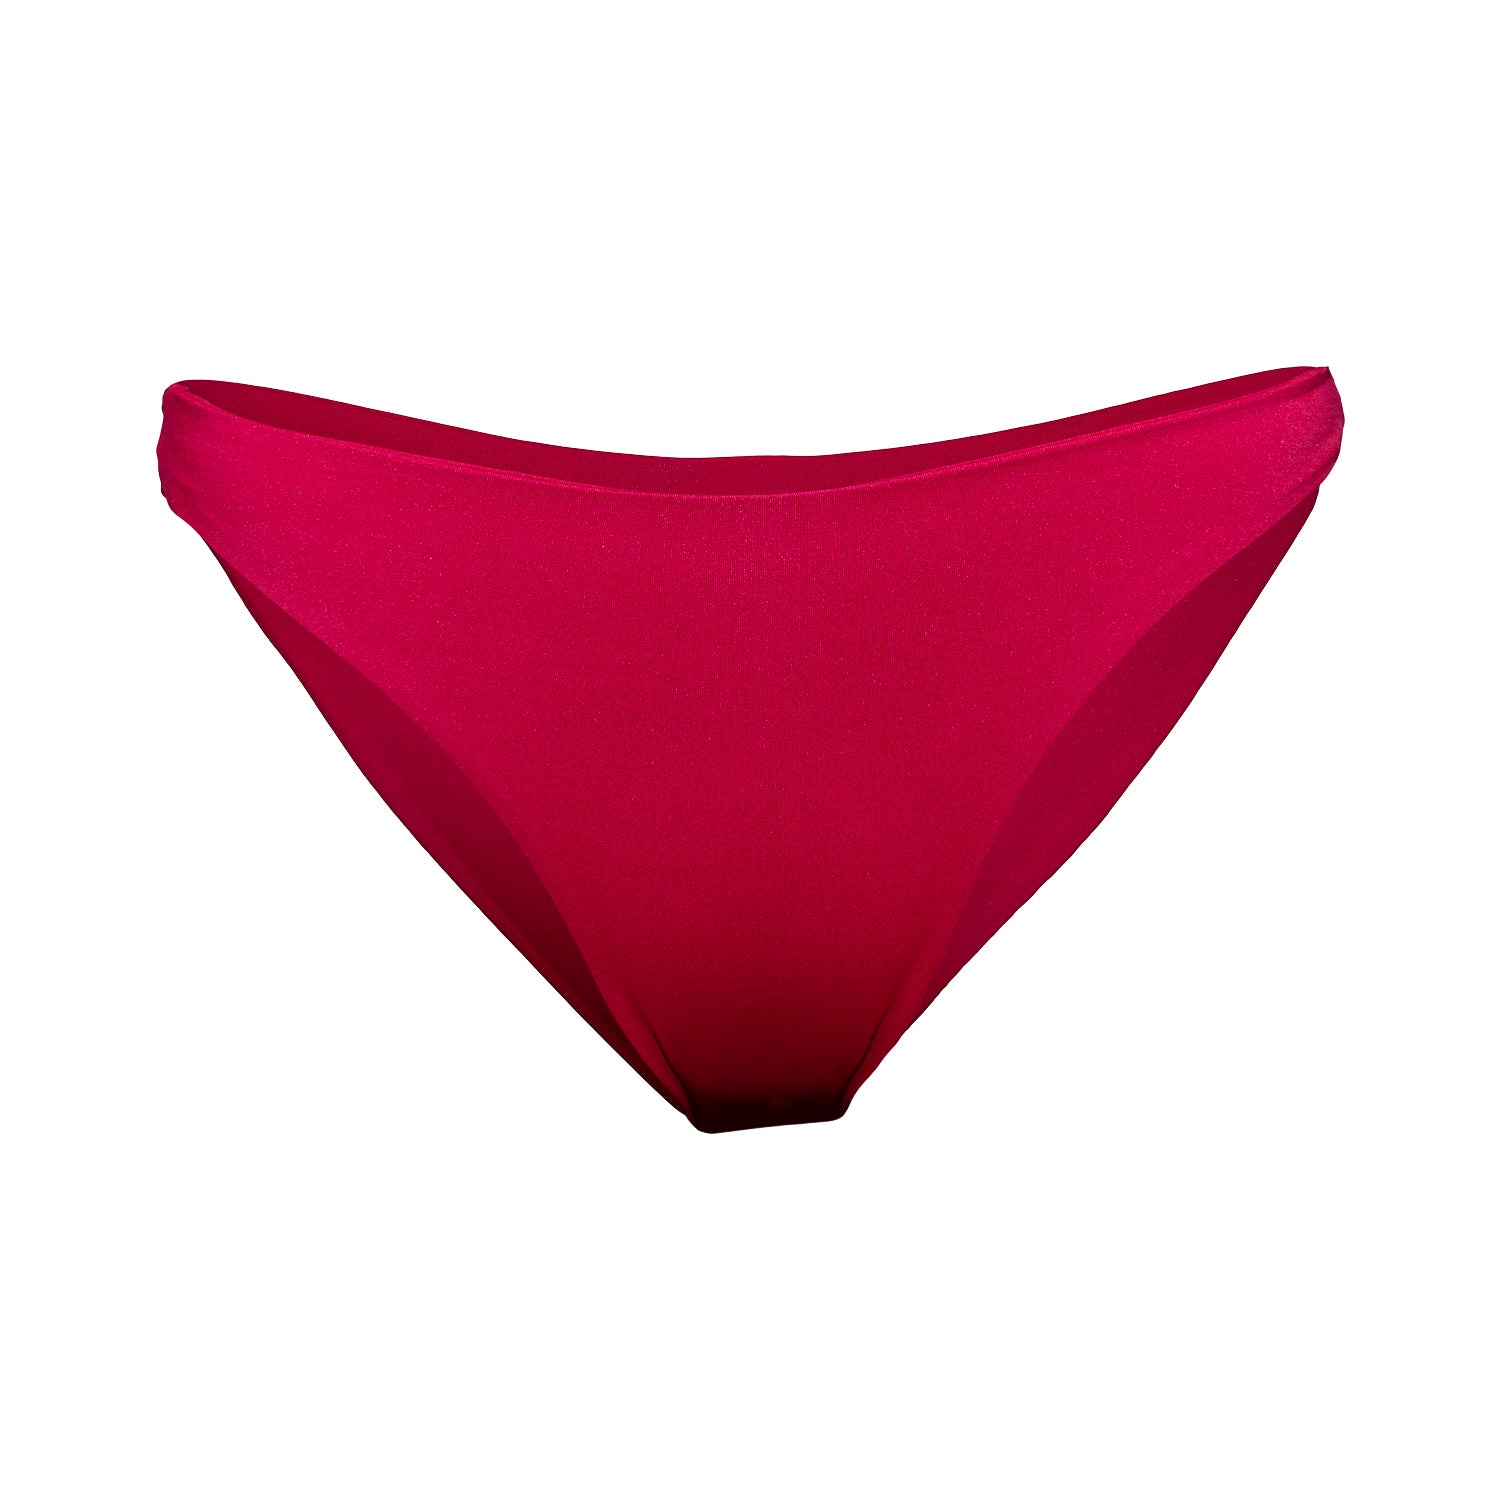 Rich red classic bikini bottoms with an extra soft touch, fine lining and thick feel. Made sustainably and ethically in Europe from finest polyamide. Perfected fit for every body shape.